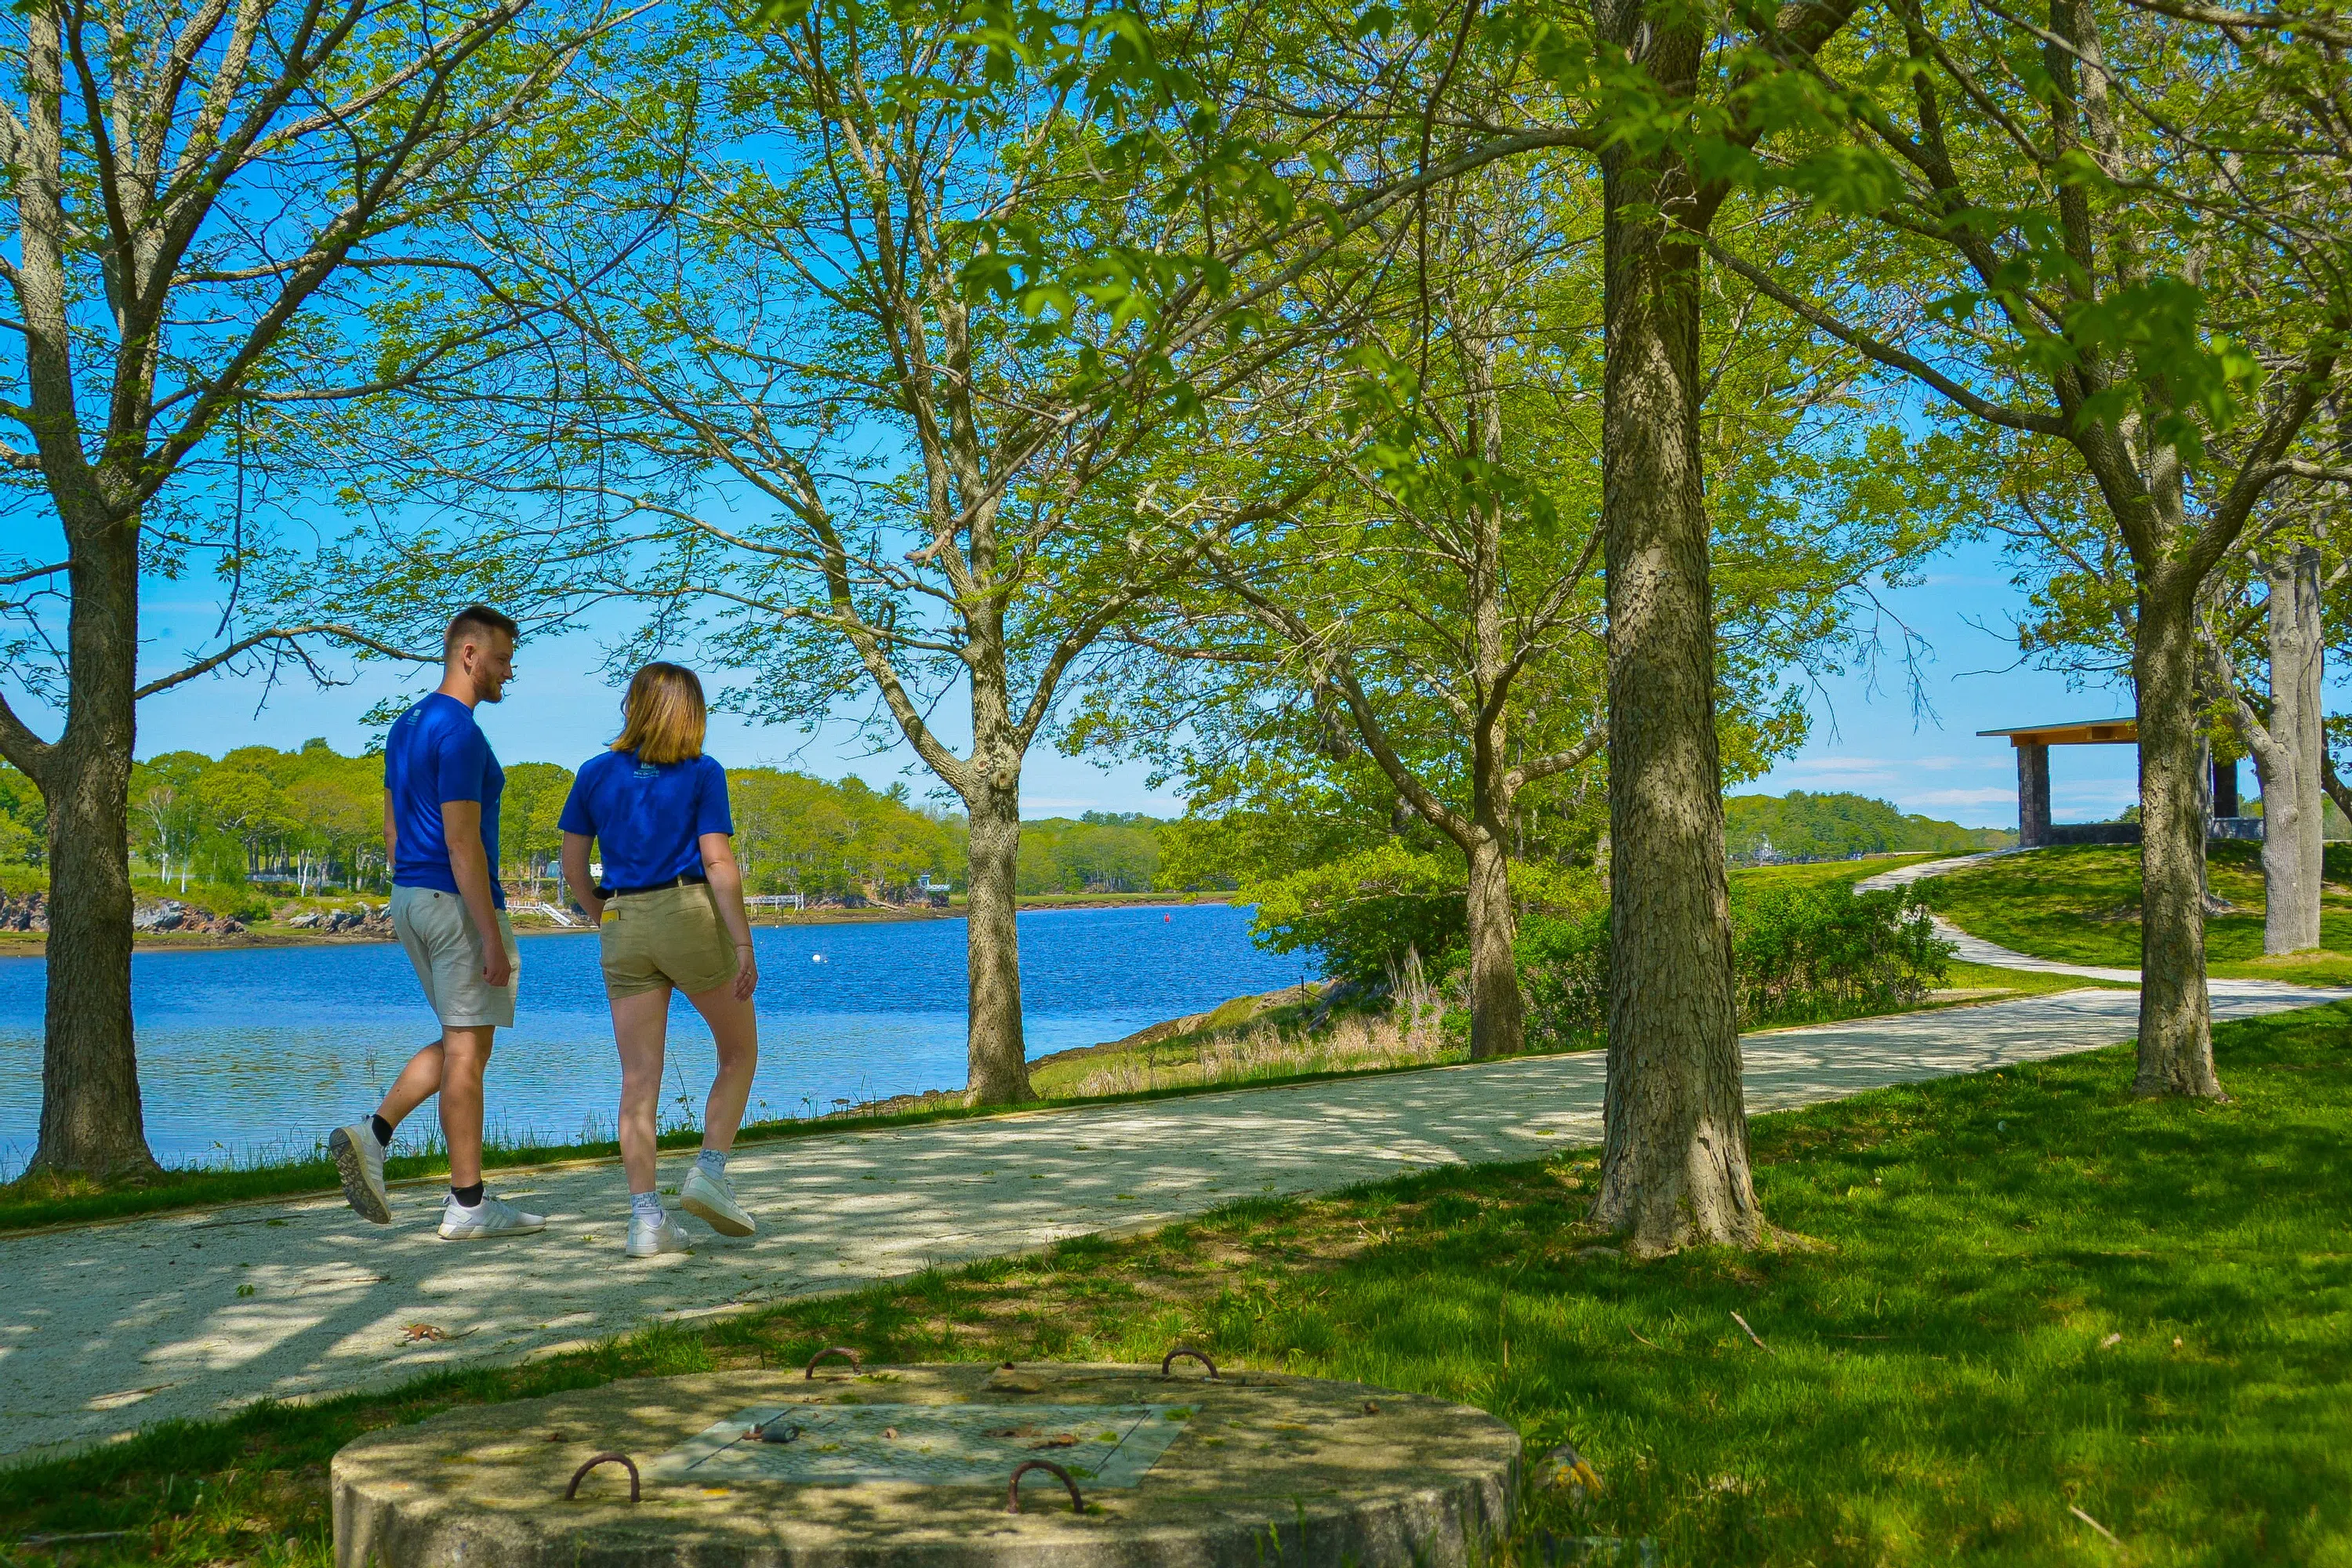 two students walk up the winding path to the stone Kiosk, which is surrounded by trees and water on a peninsula..